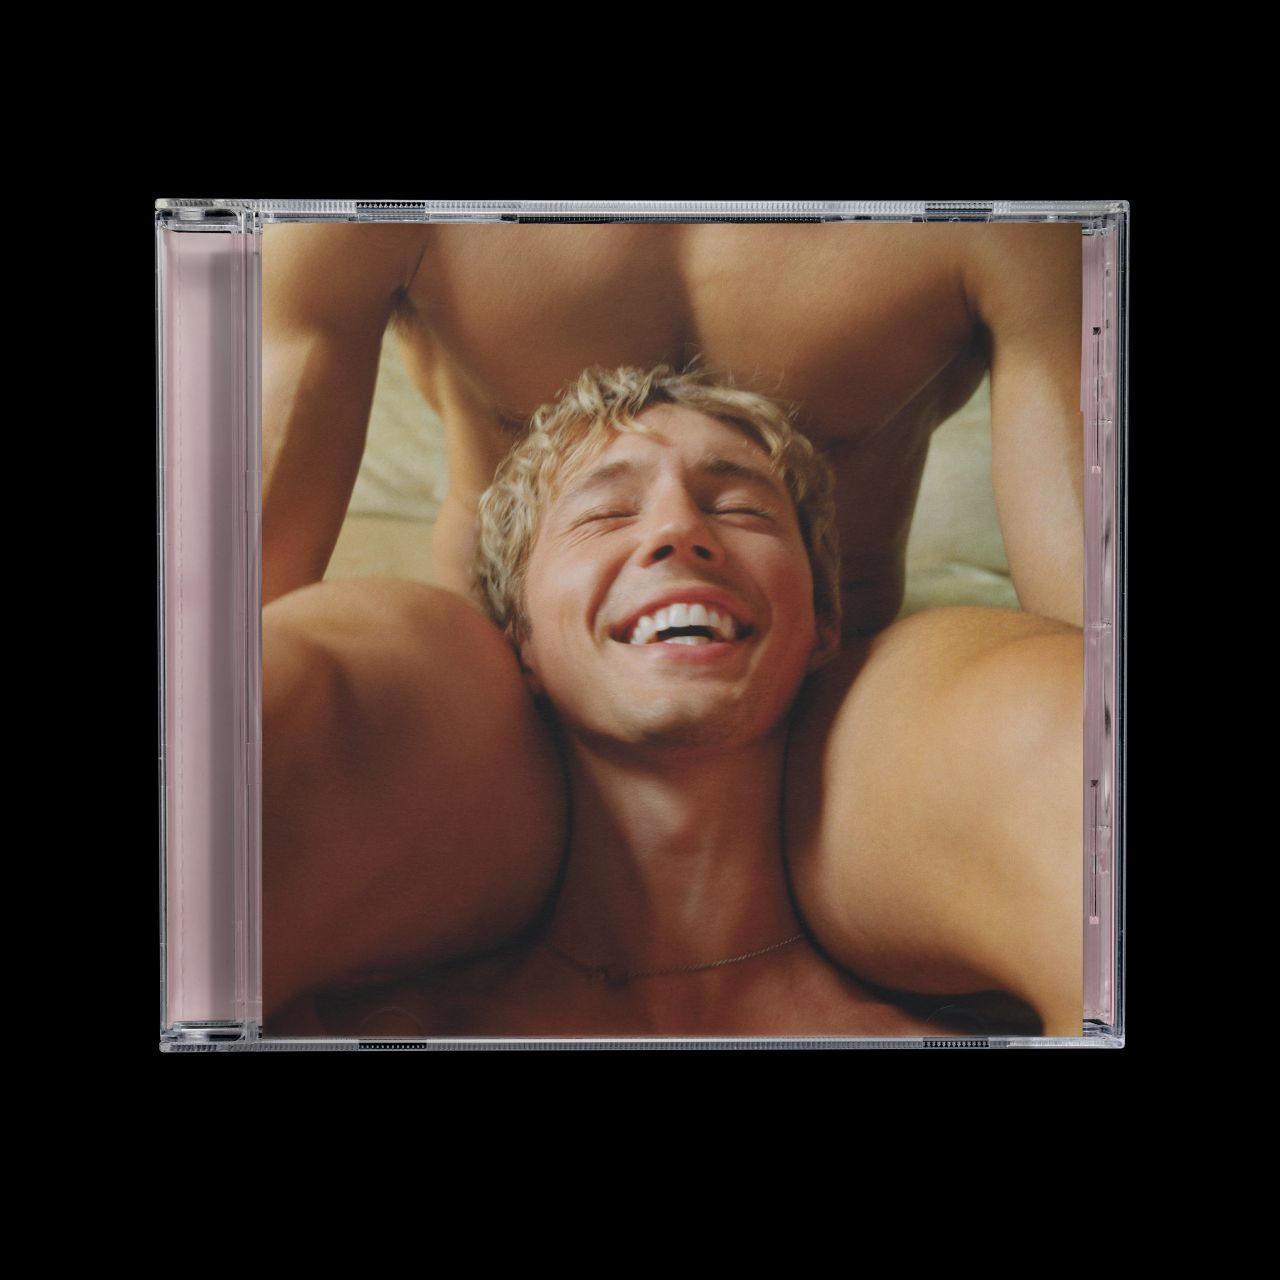 Troye Sivan - Something (CD) Each - To Other Give